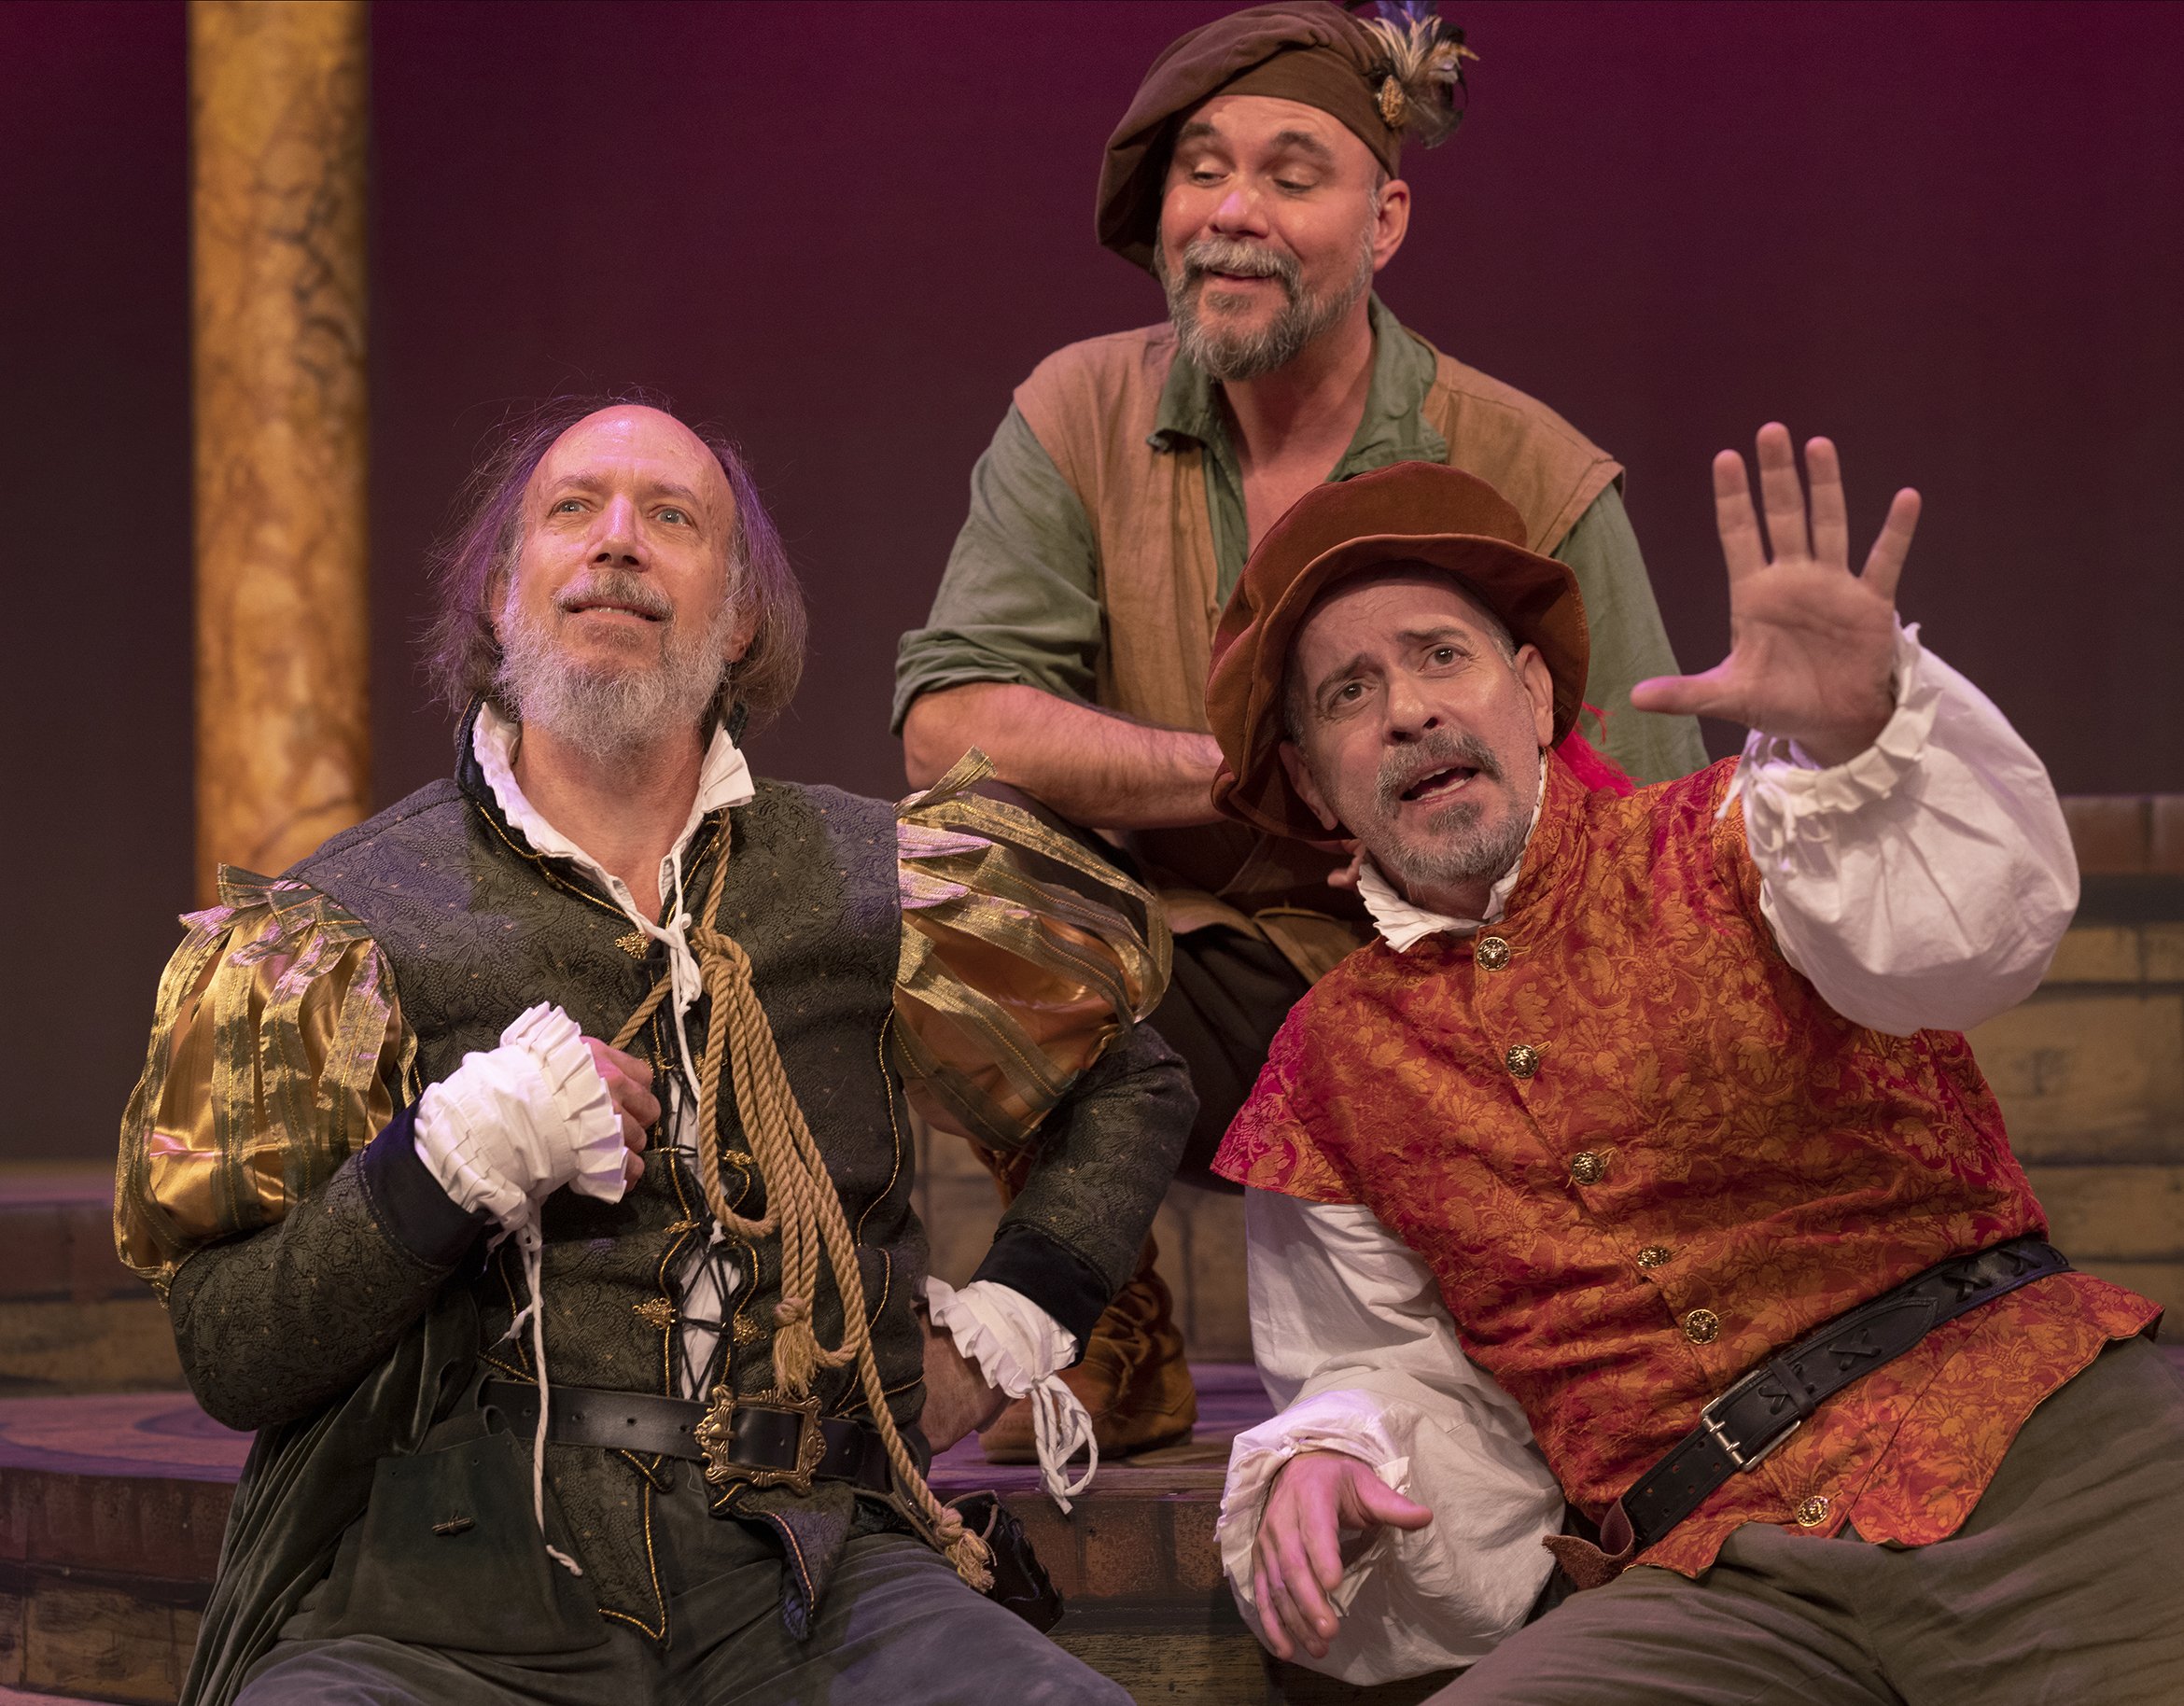 John Keeney as Sir Andrew, Christopher Younggren as Fabian and Michael Levin as Sir Toby. Photo by Tim Fuller.